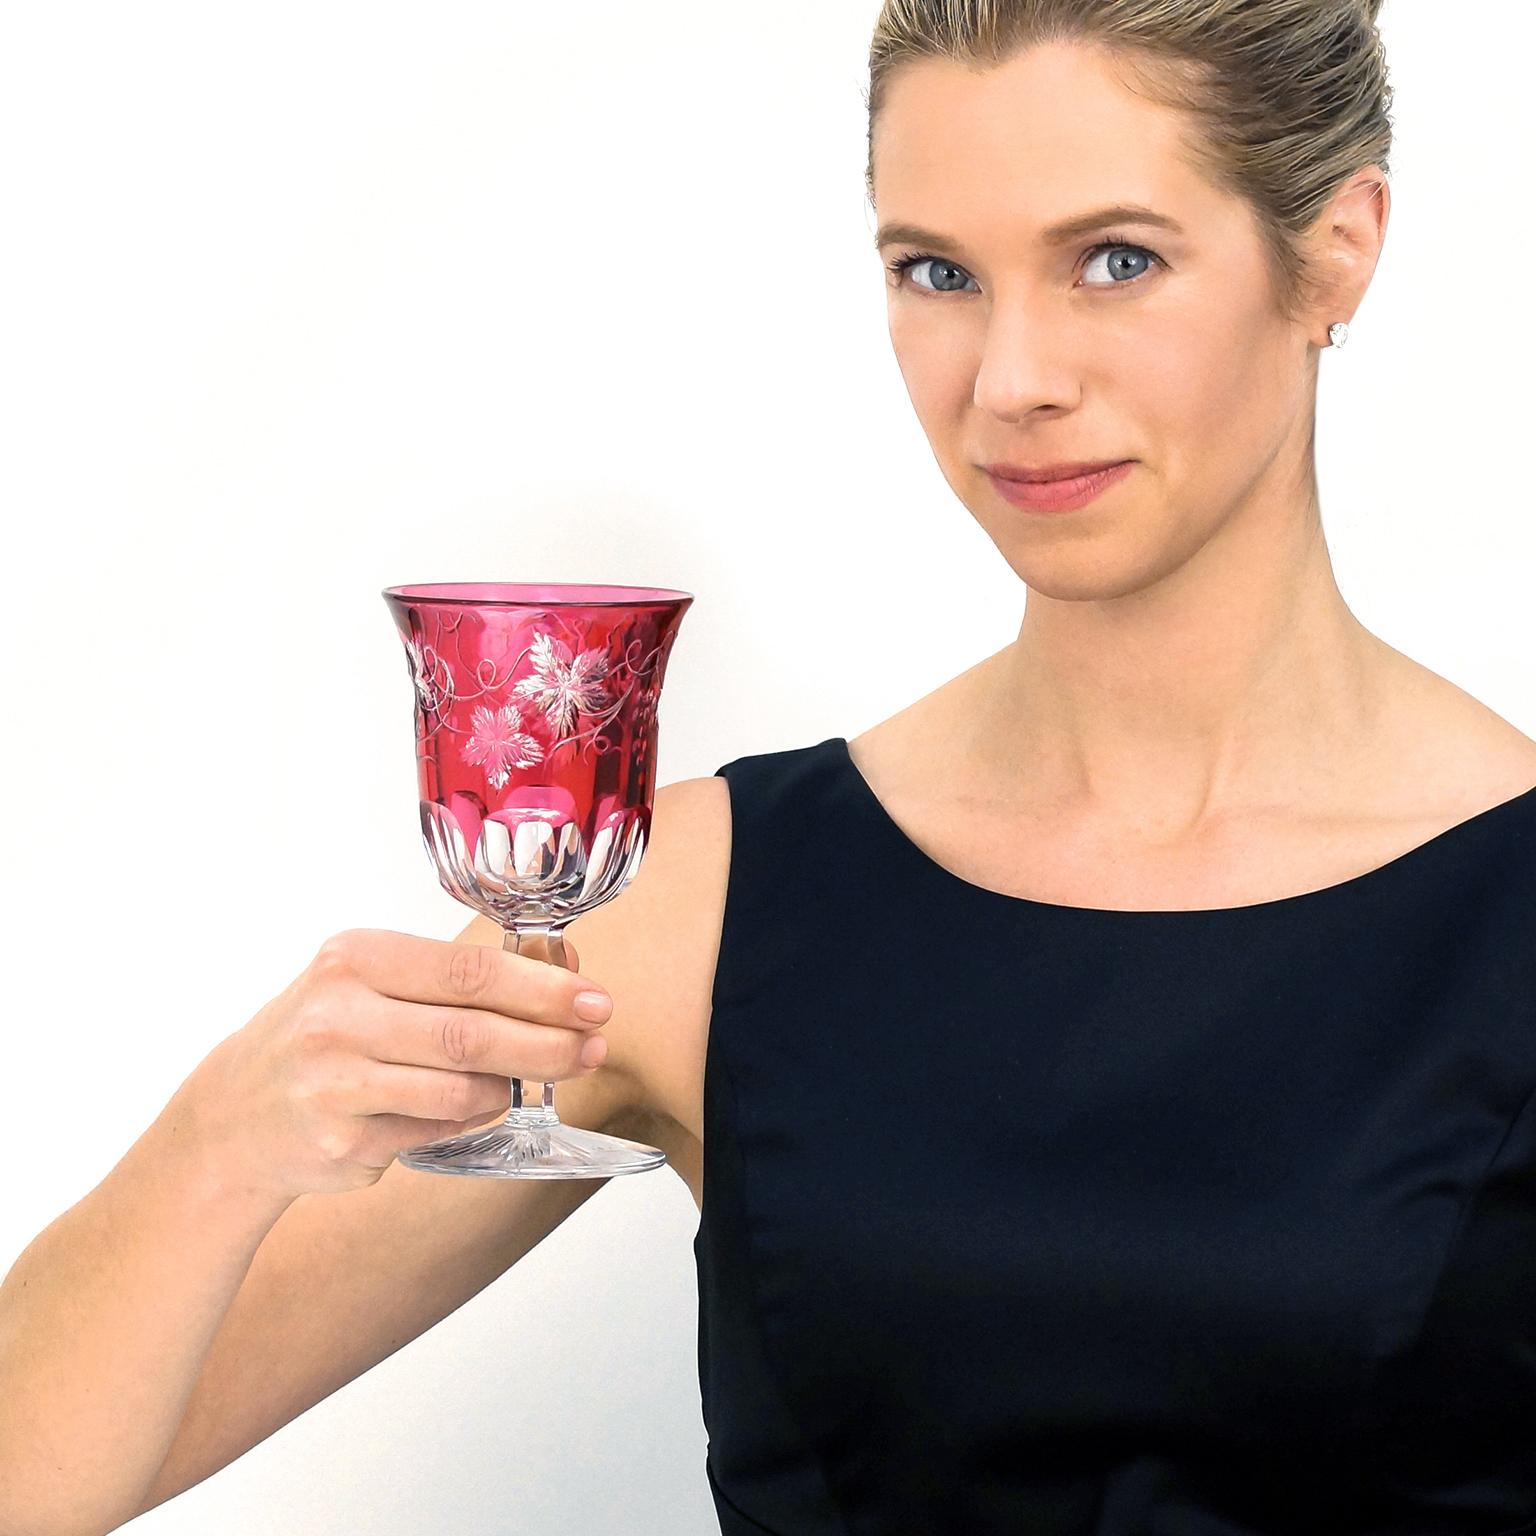 Circa 1925, American. These beautiful crystal water goblets in vibrant cranberry cut-to-clear feature an intricate grapevine pattern complete with swirling tendrils and detailed leaves. Comfortable in the hand, they are meticulously made and in